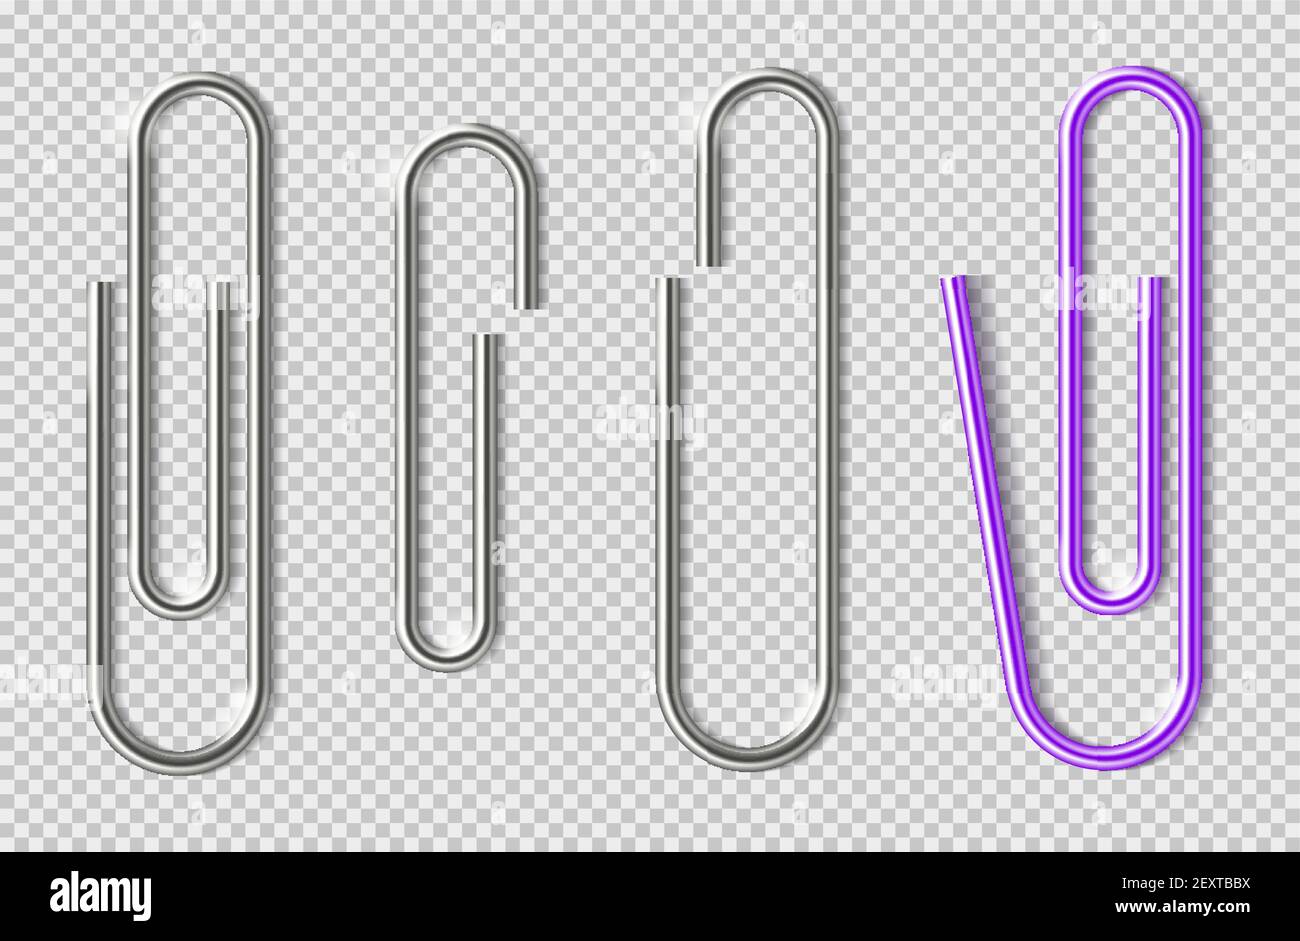 Paper clips. Realistic metal clip for paper sheets. Office paperclips, school stationery. Holders for attaching notes vector template. Illustration paperclip, stationery for paper sheet attach Stock Vector